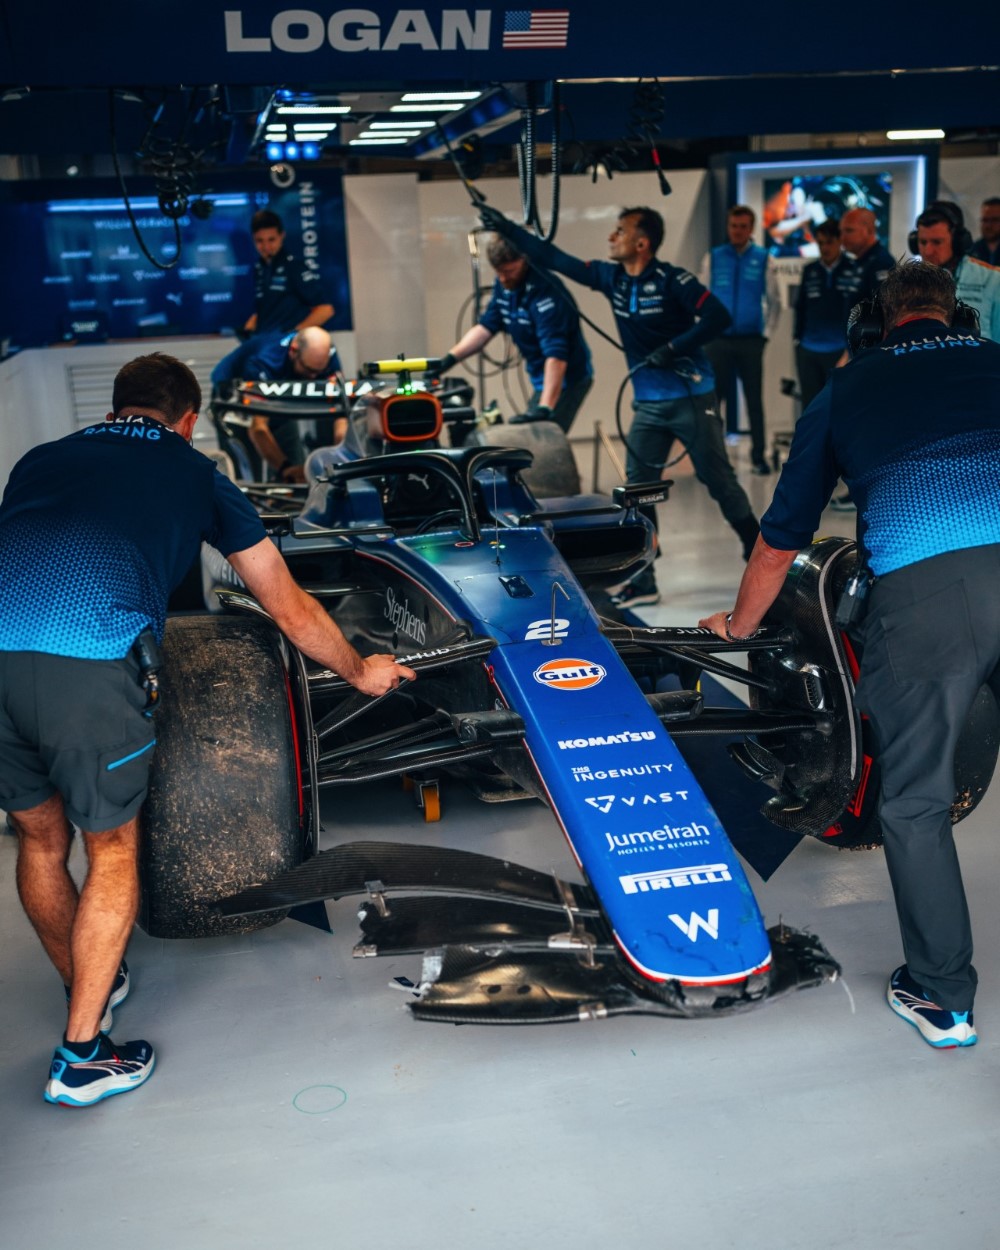 The Williams mechanics get Sargeant's wadded up car back into the garage.